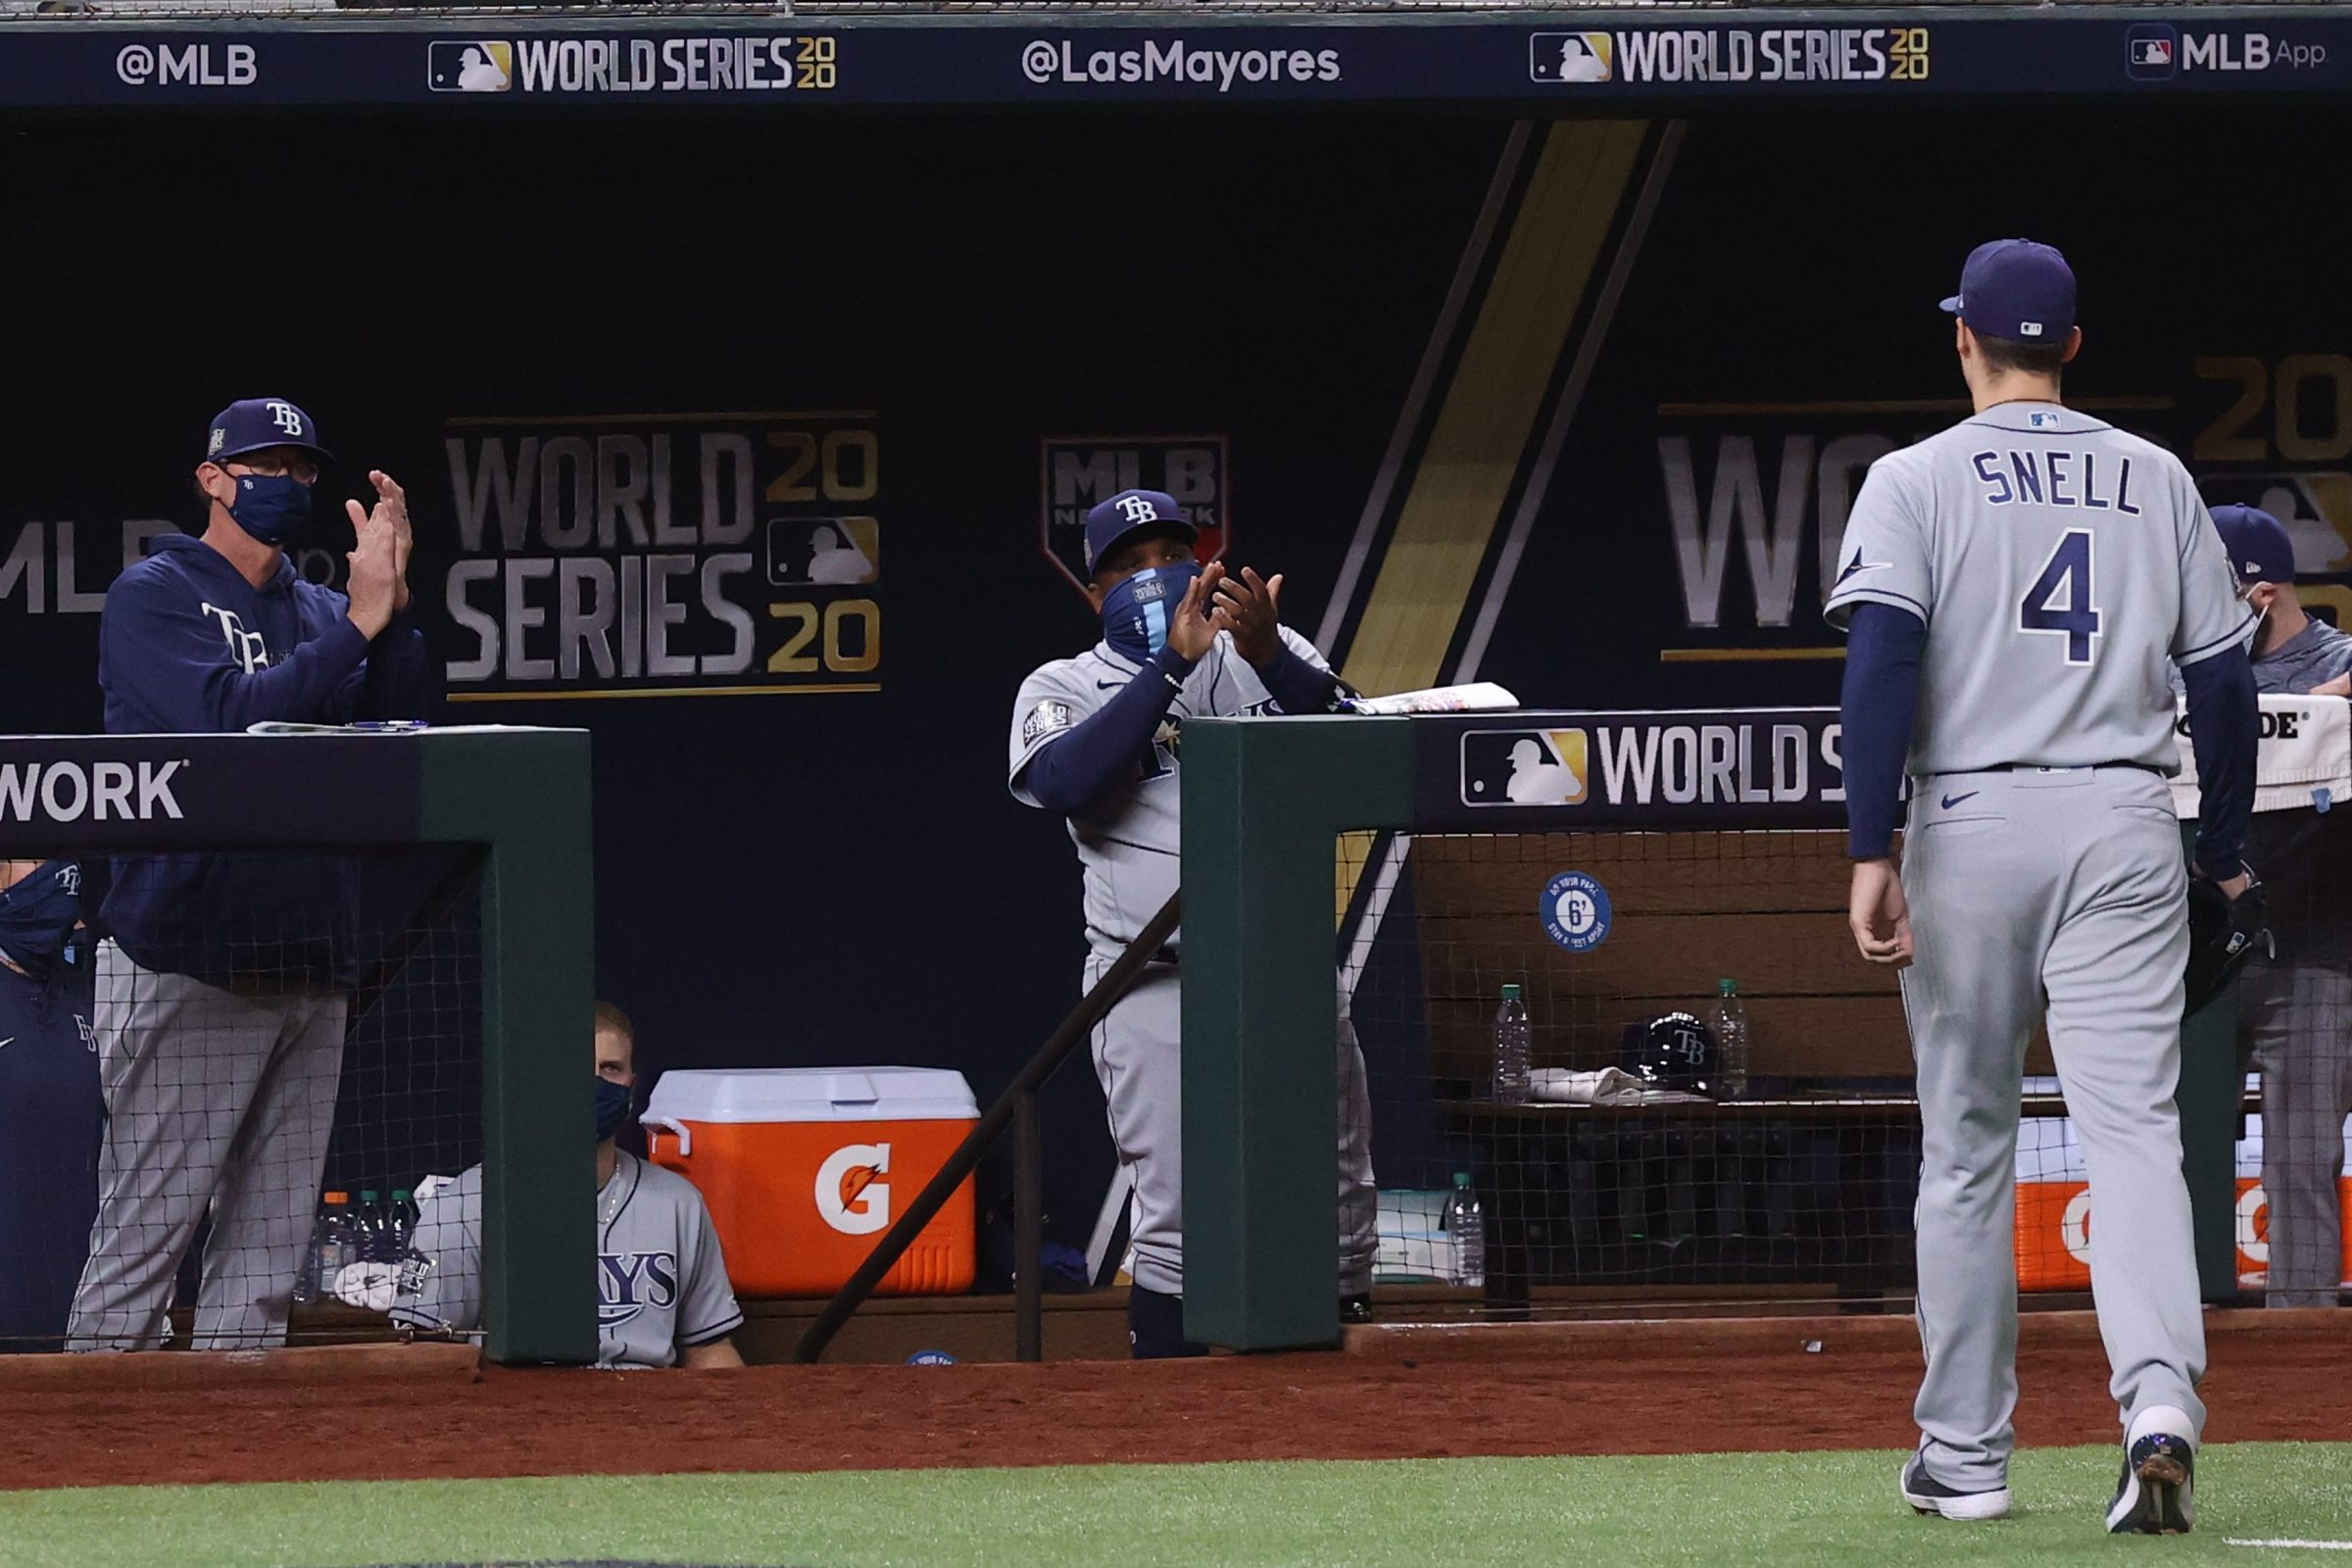 Blake Snell #4 of the Tampa Bay Rays is congratulated by pitching coach Kyle Snyder and third base coach Rodney Linares after being taken out of the game